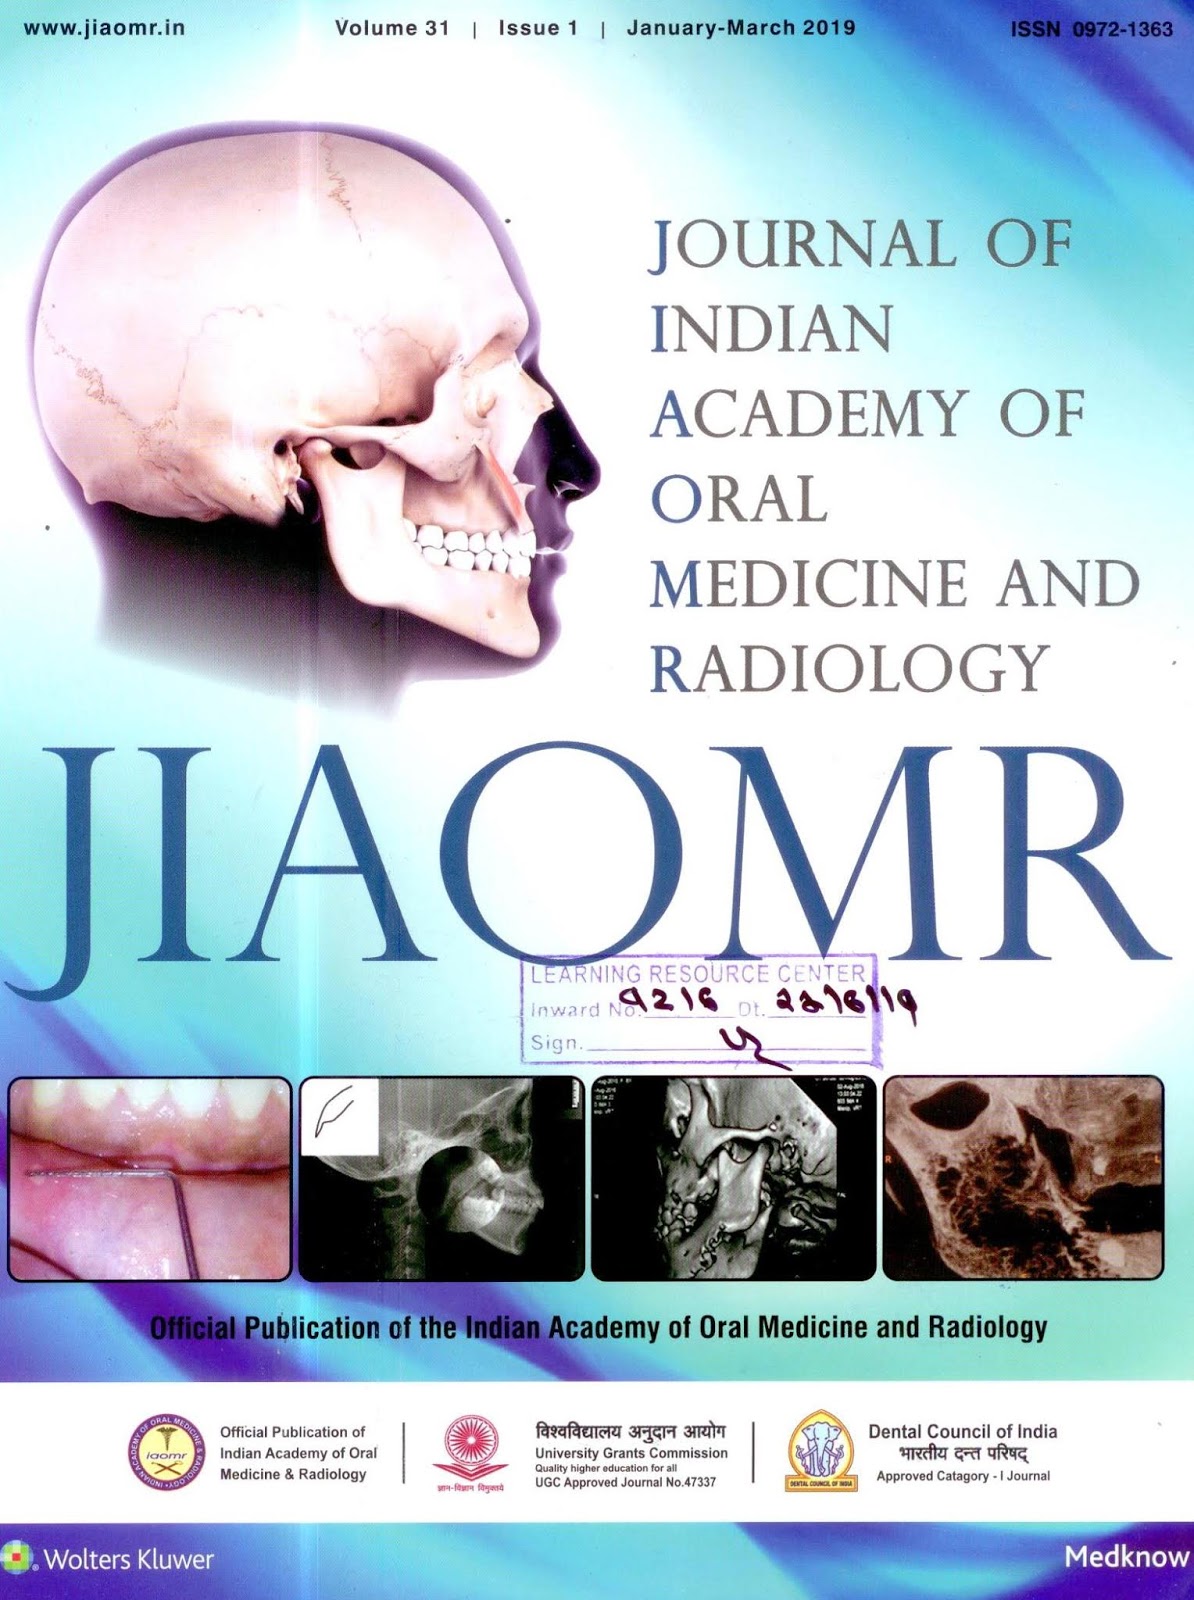 http://www.jiaomr.in/showBackIssue.asp?issn=0972-1363;year=2019;volume=31;issue=1;month=January-March